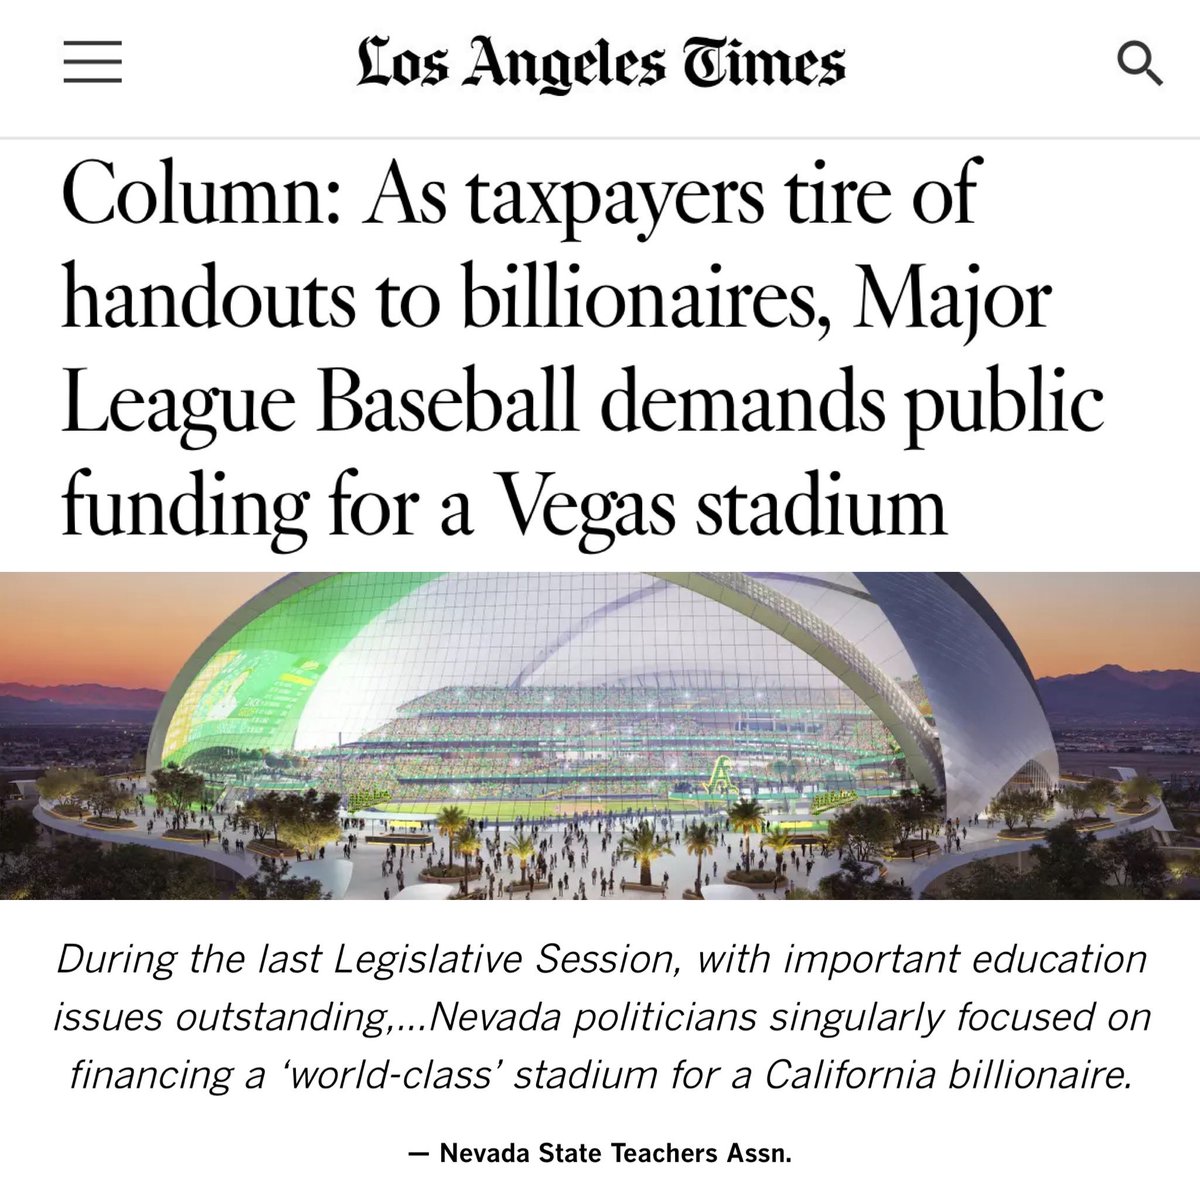 If taxpayers are going to pay to build a stadium, then the taxpayers should own the stadium. You can’t socialize the cost, then privatize the profits.